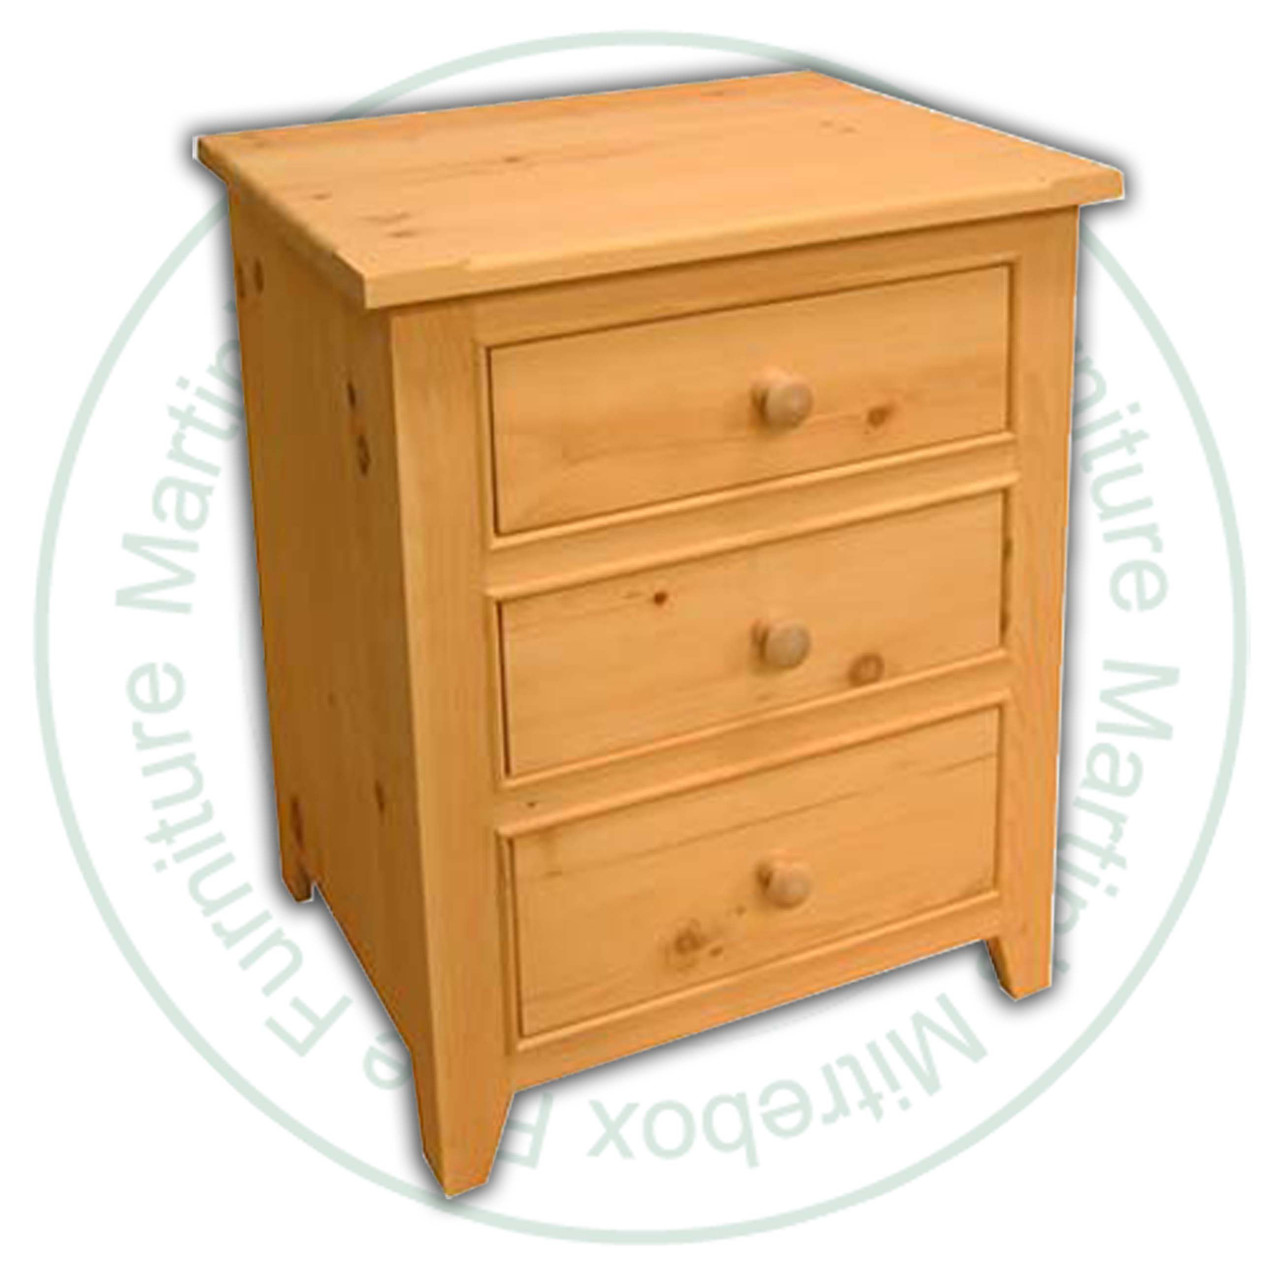 Wormy Maple A Series Nightstand 28''H x 24''W x 28''D 3 Drawers